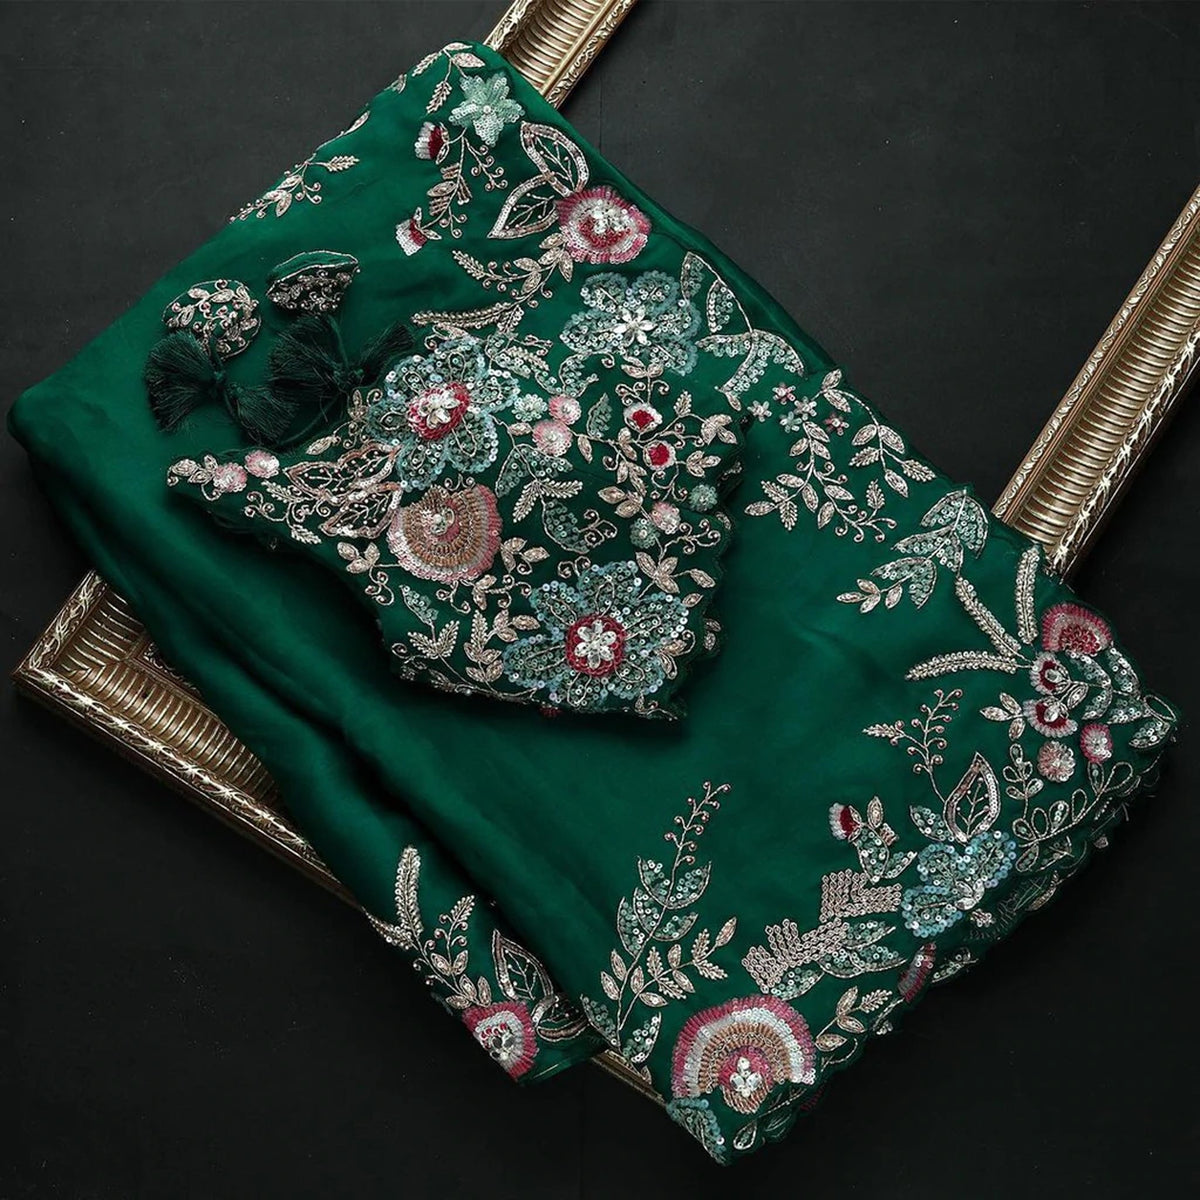 Gorgeous Organza Saree with Thread, Sequins, and Zari Embroidery work - Colorful Saree